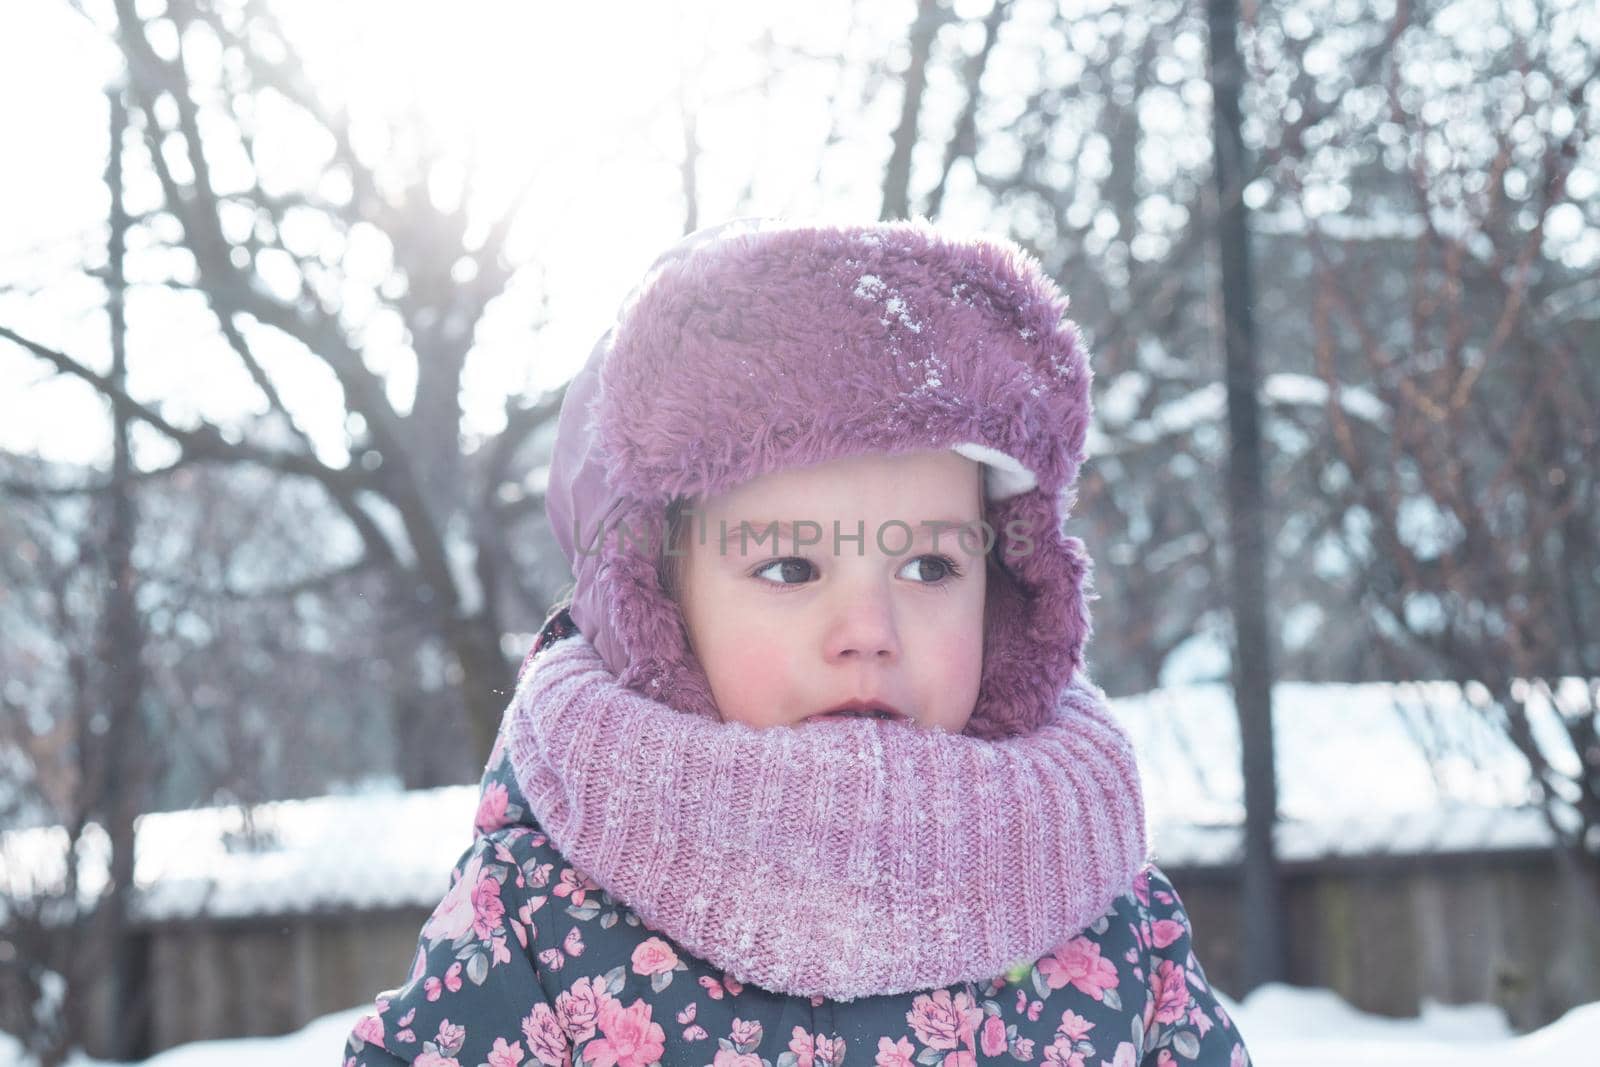 Winter, family, childhood concepts - close-up portrait authentic little preschool minor 3-4 years girl in pink hat look at camera posing smile in snowy frosty weather. happy kid face have fun outdoors.